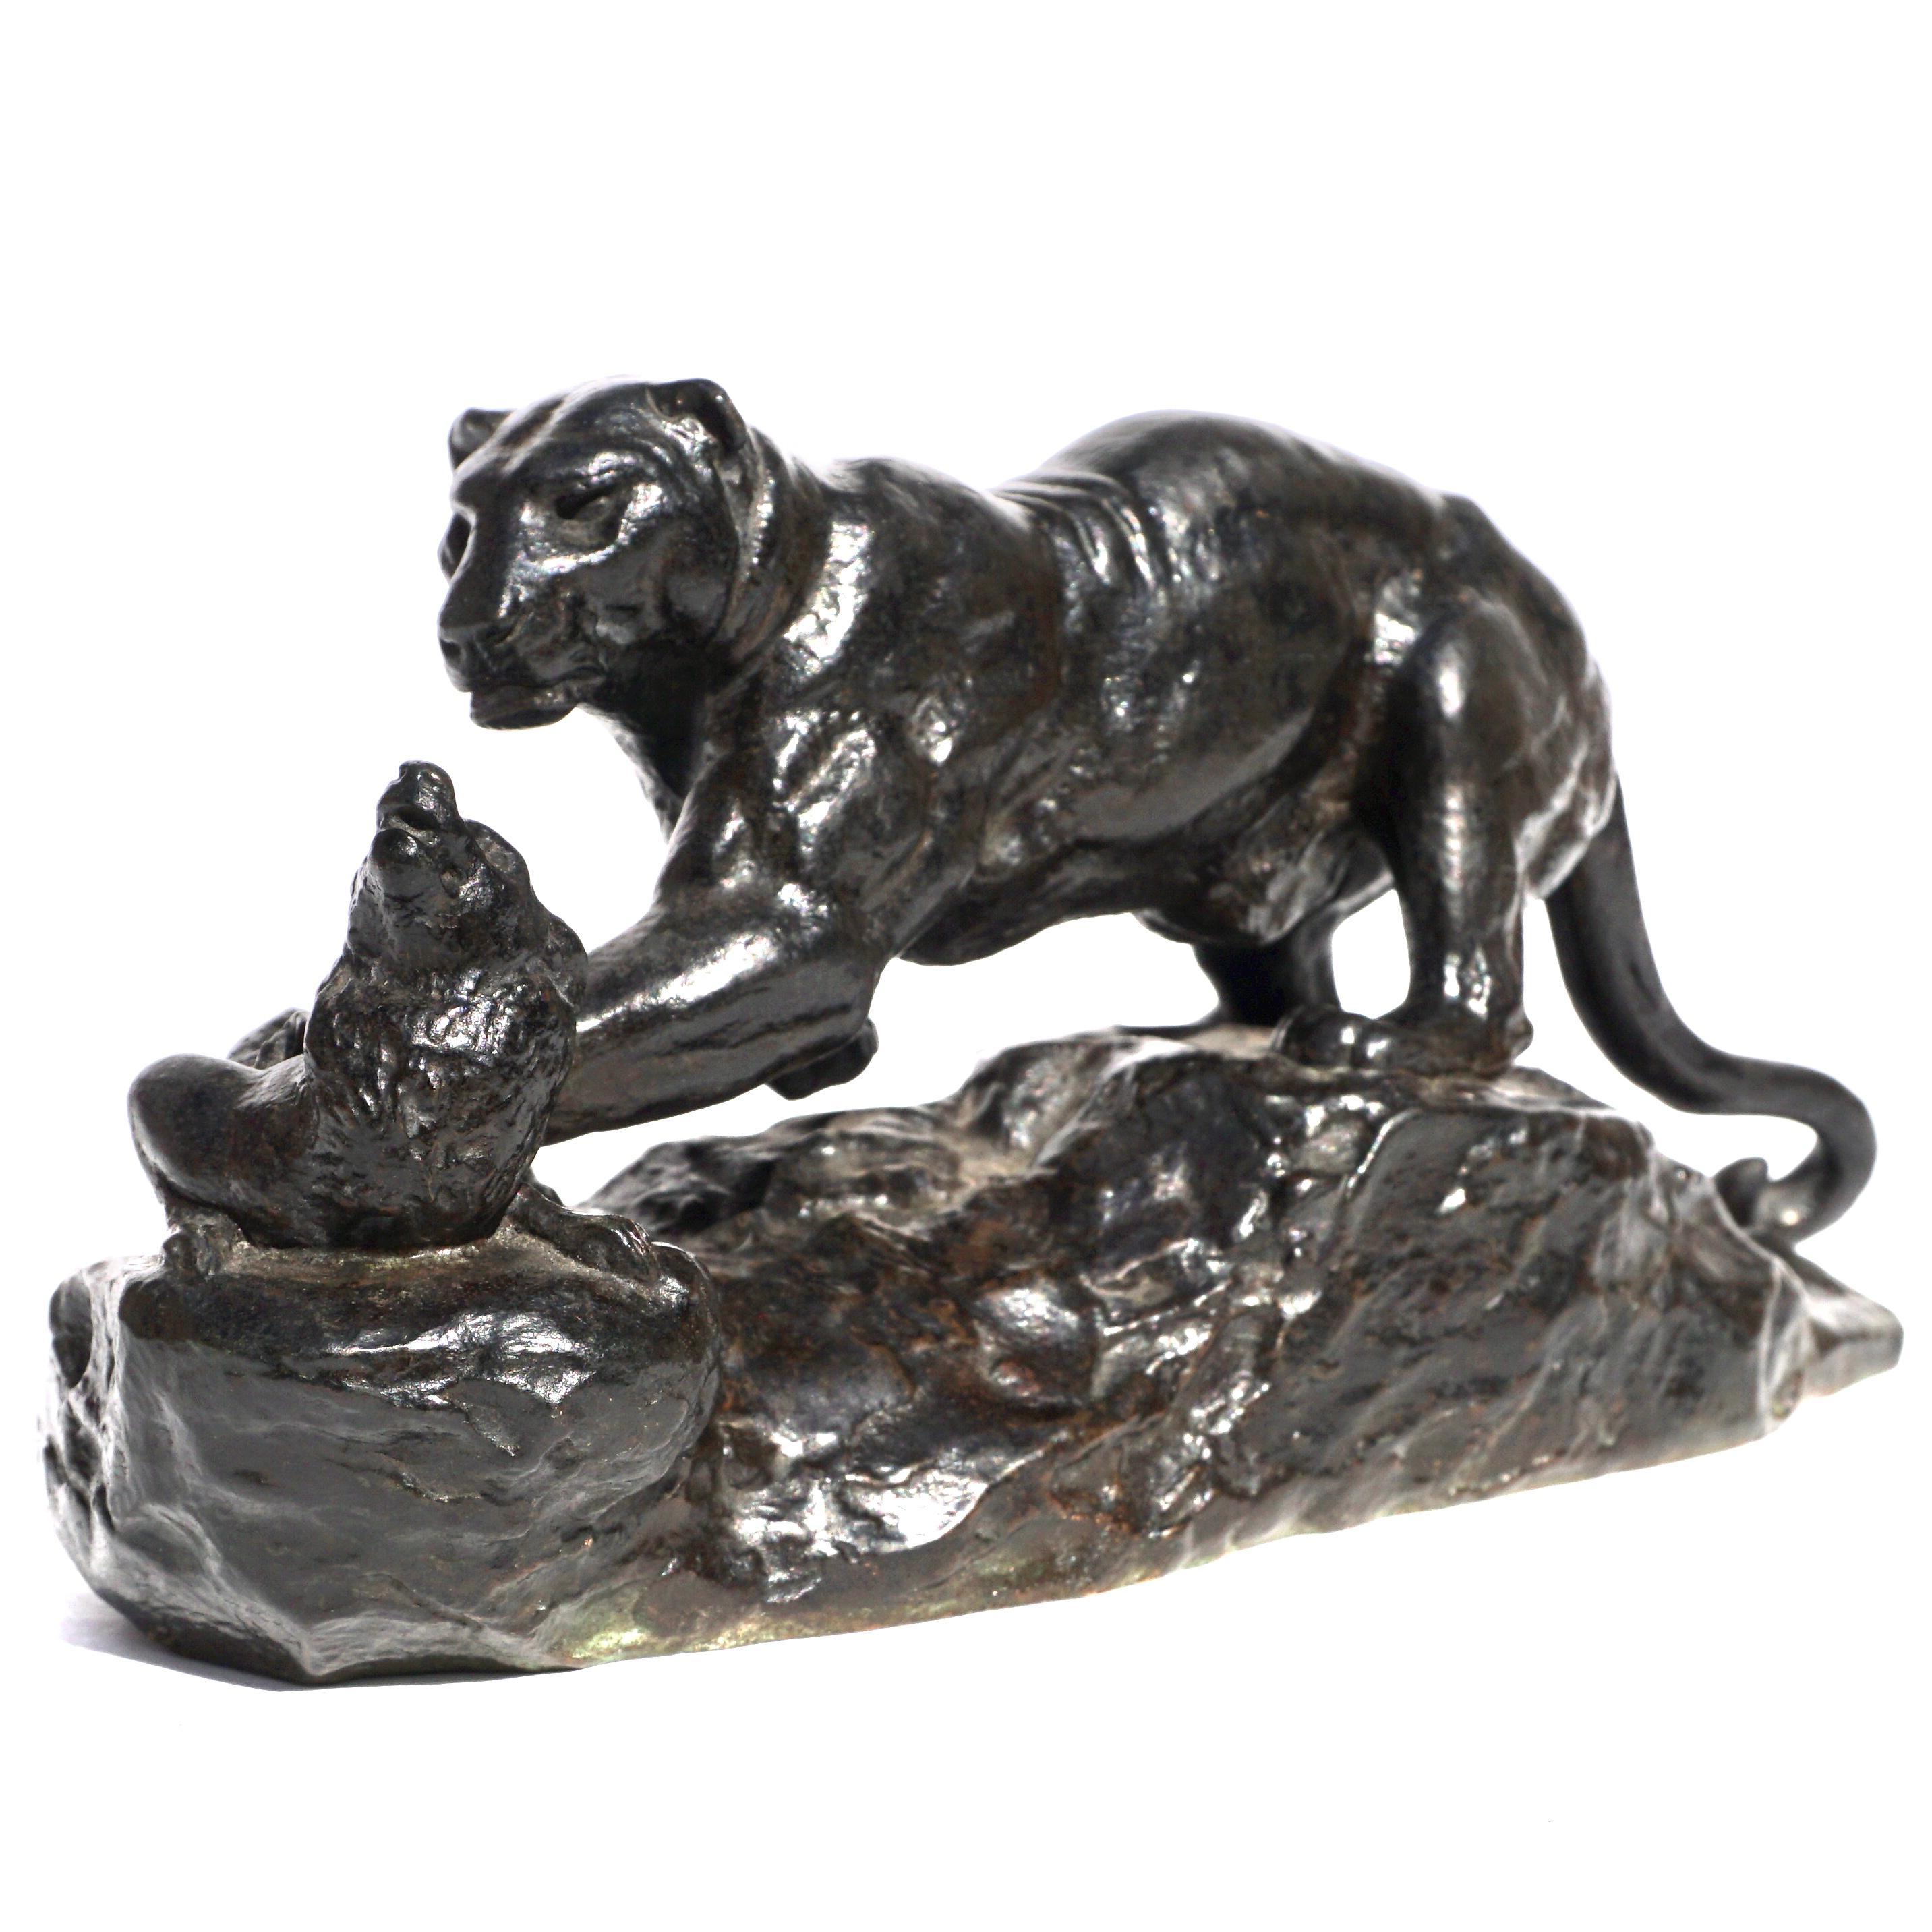 ANTOINE-LOUIS BARYE (FRENCH, 1795-1875) 
Panthère surprenant un zibeth, seconde version (Panther attacking a civet cat, second version)
signed BARYE 
bronze, dark-brown patina with rust highlights 

Length: 9.25 Inches (23.5 cm)
Height:4.25 in.